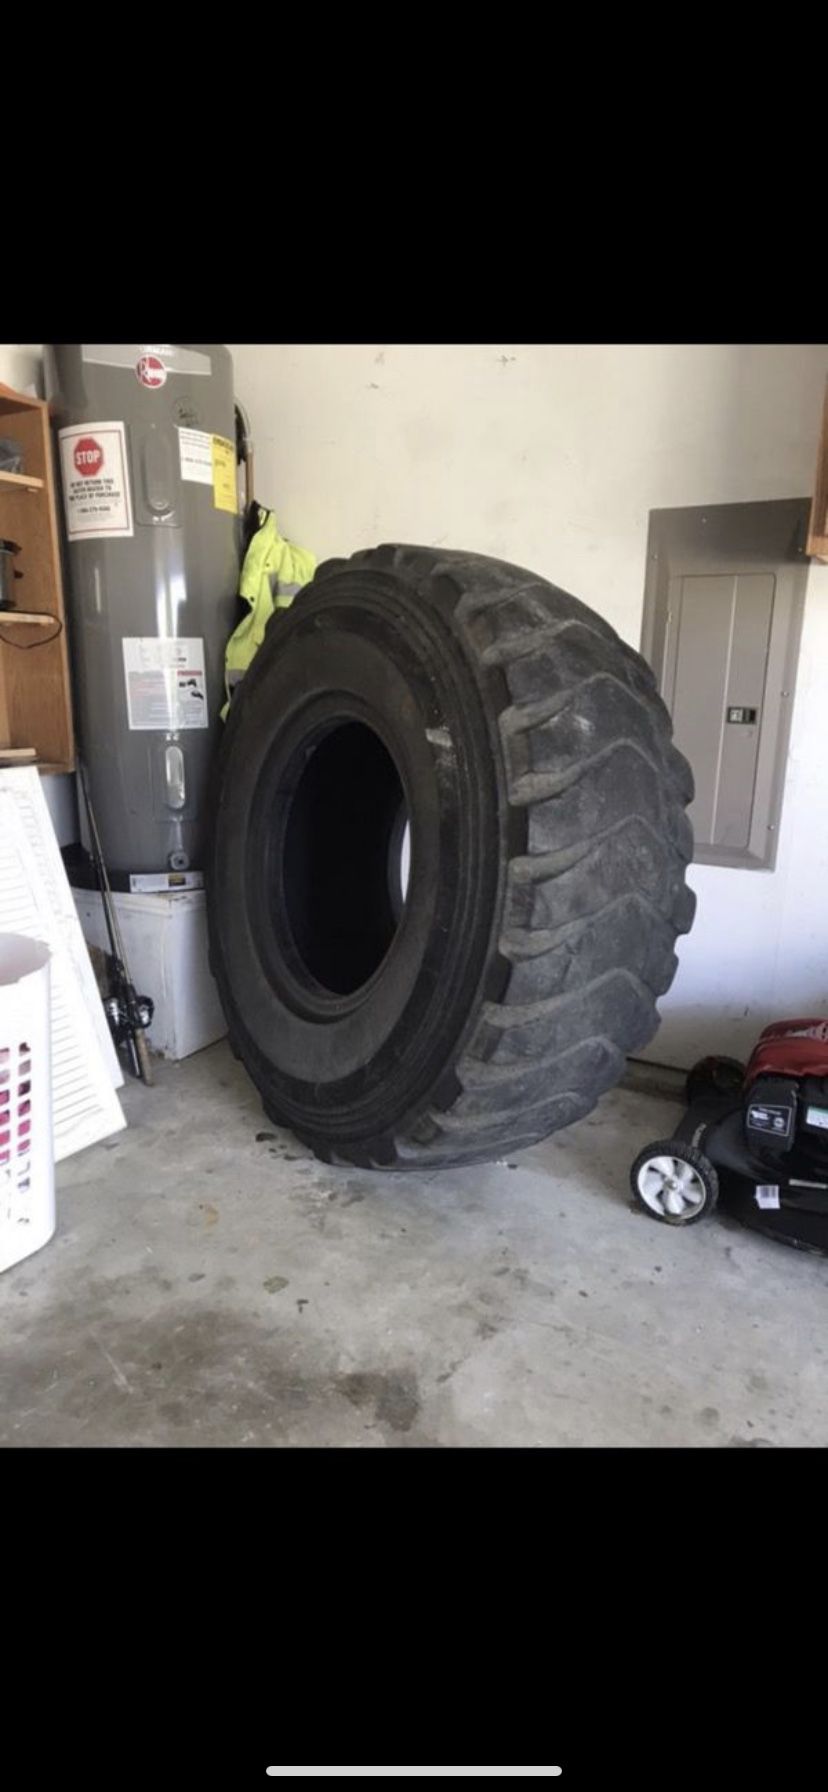 Workout tire